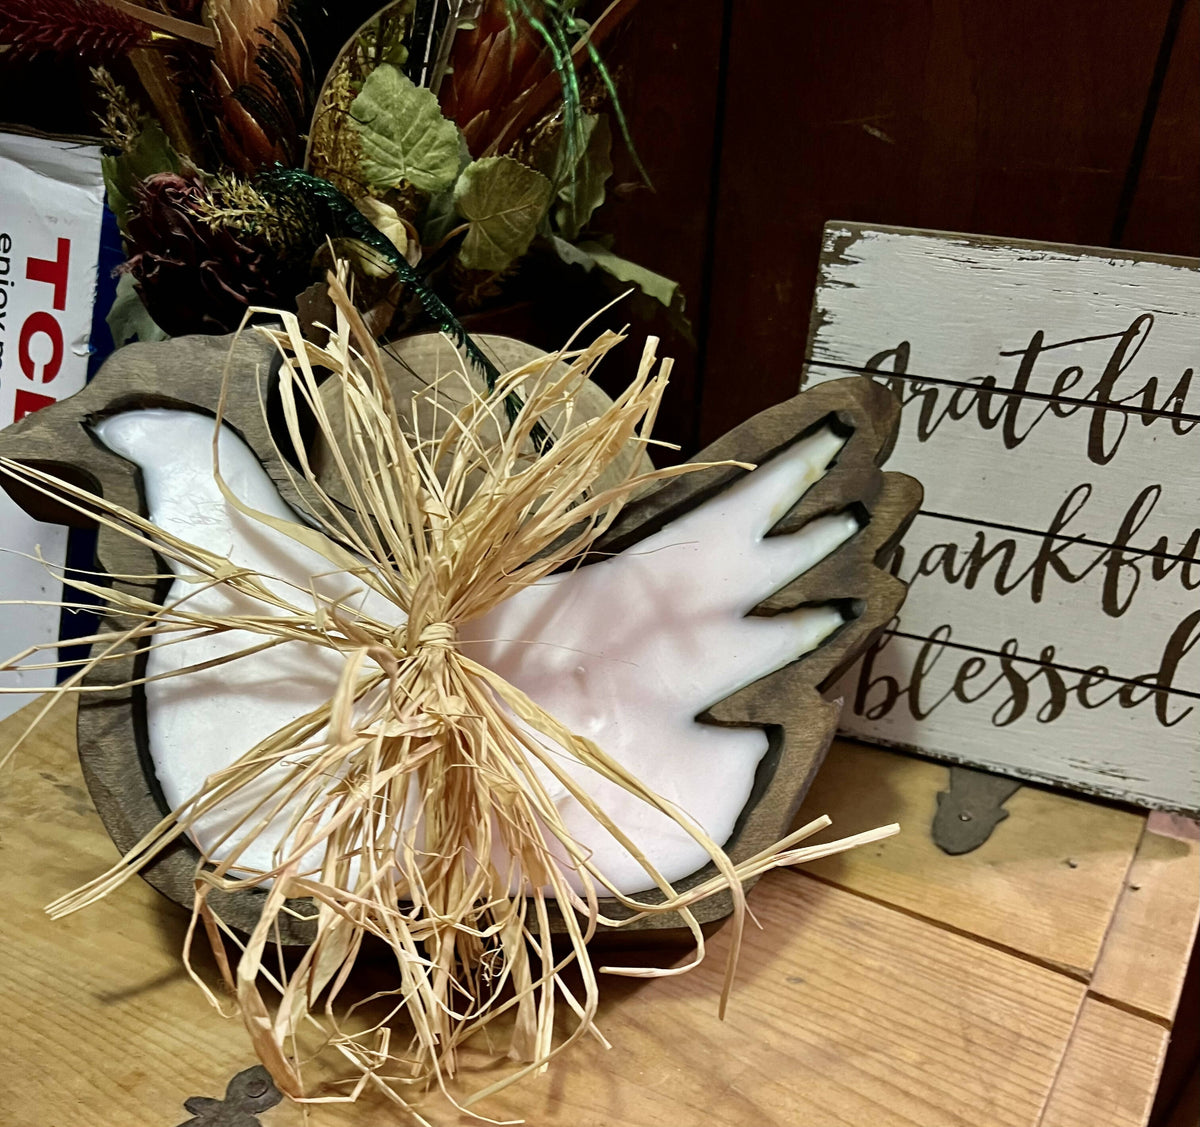 Chicken Wood Bowl Candle-Candles-Vintage Cowgirl-Deadwood South Boutique, Women's Fashion Boutique in Henderson, TX